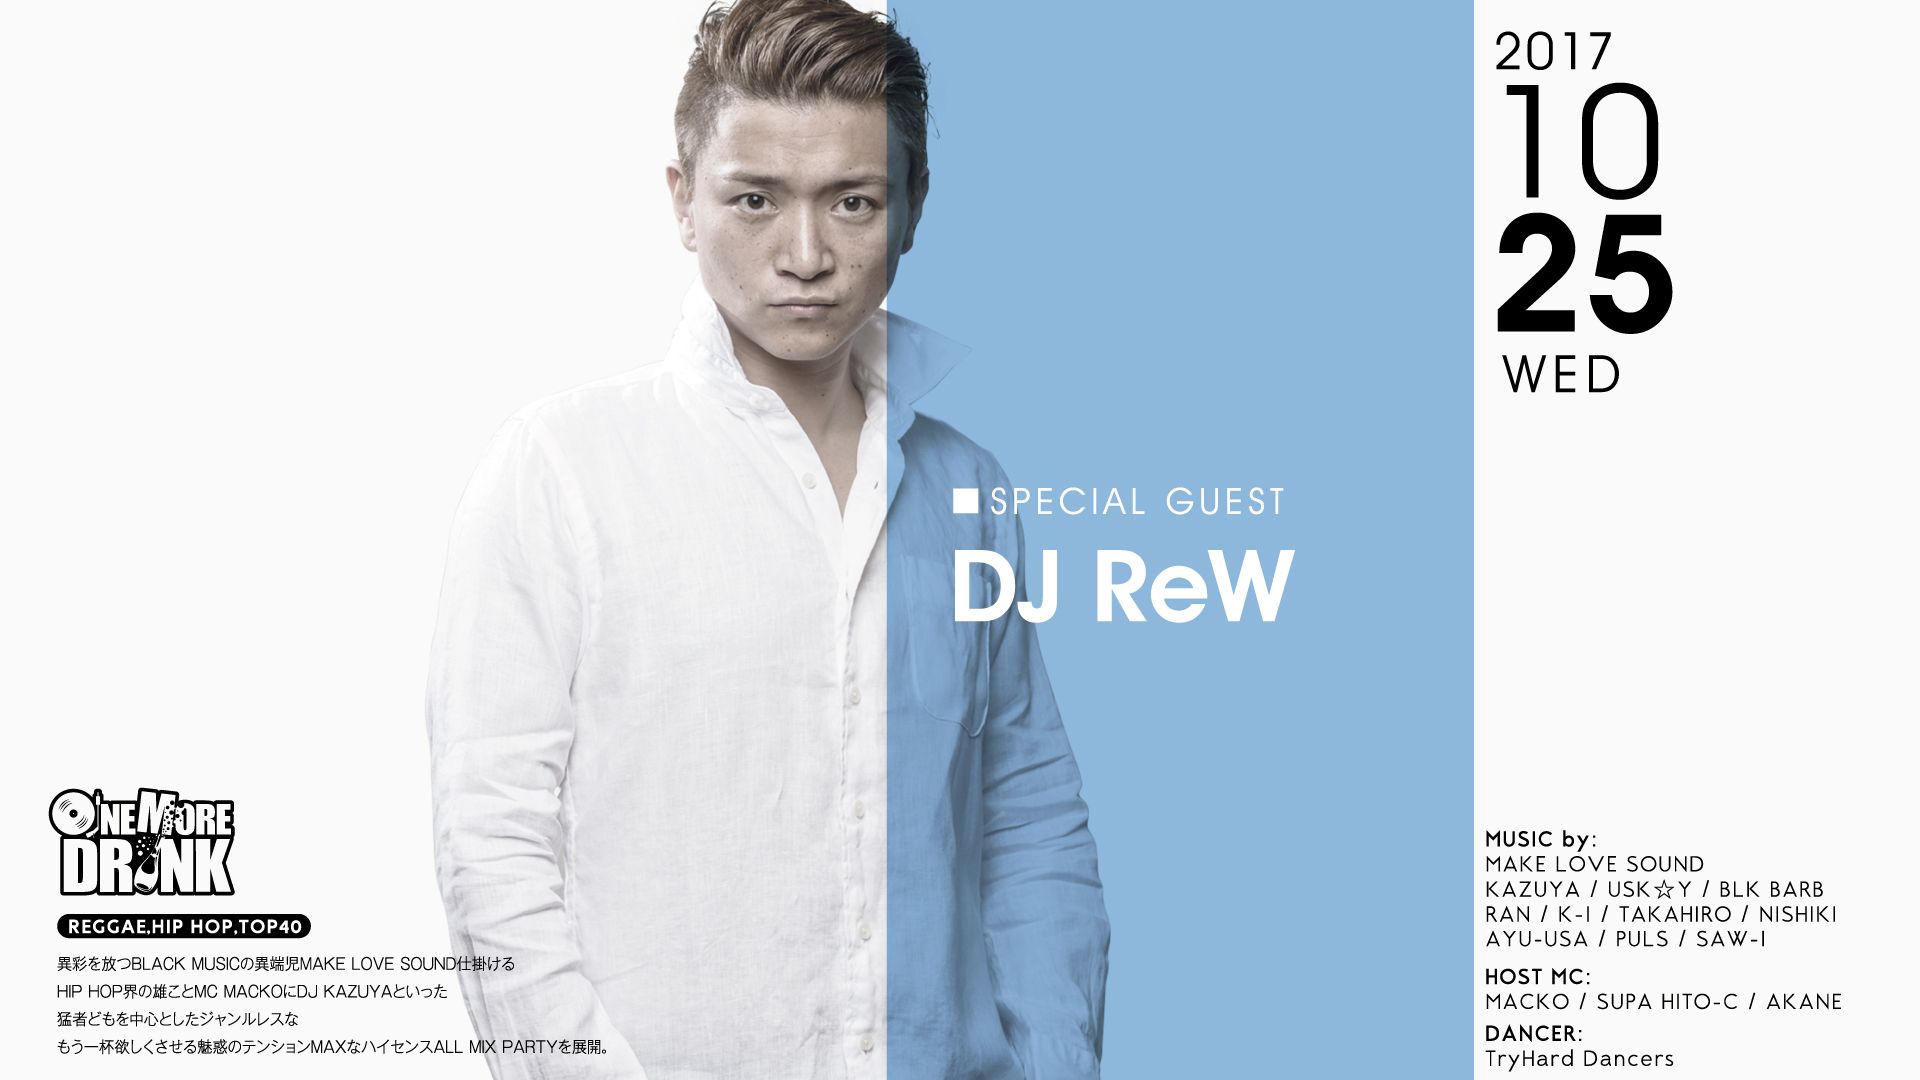 Special Guest: DJ ReW / One More Drink